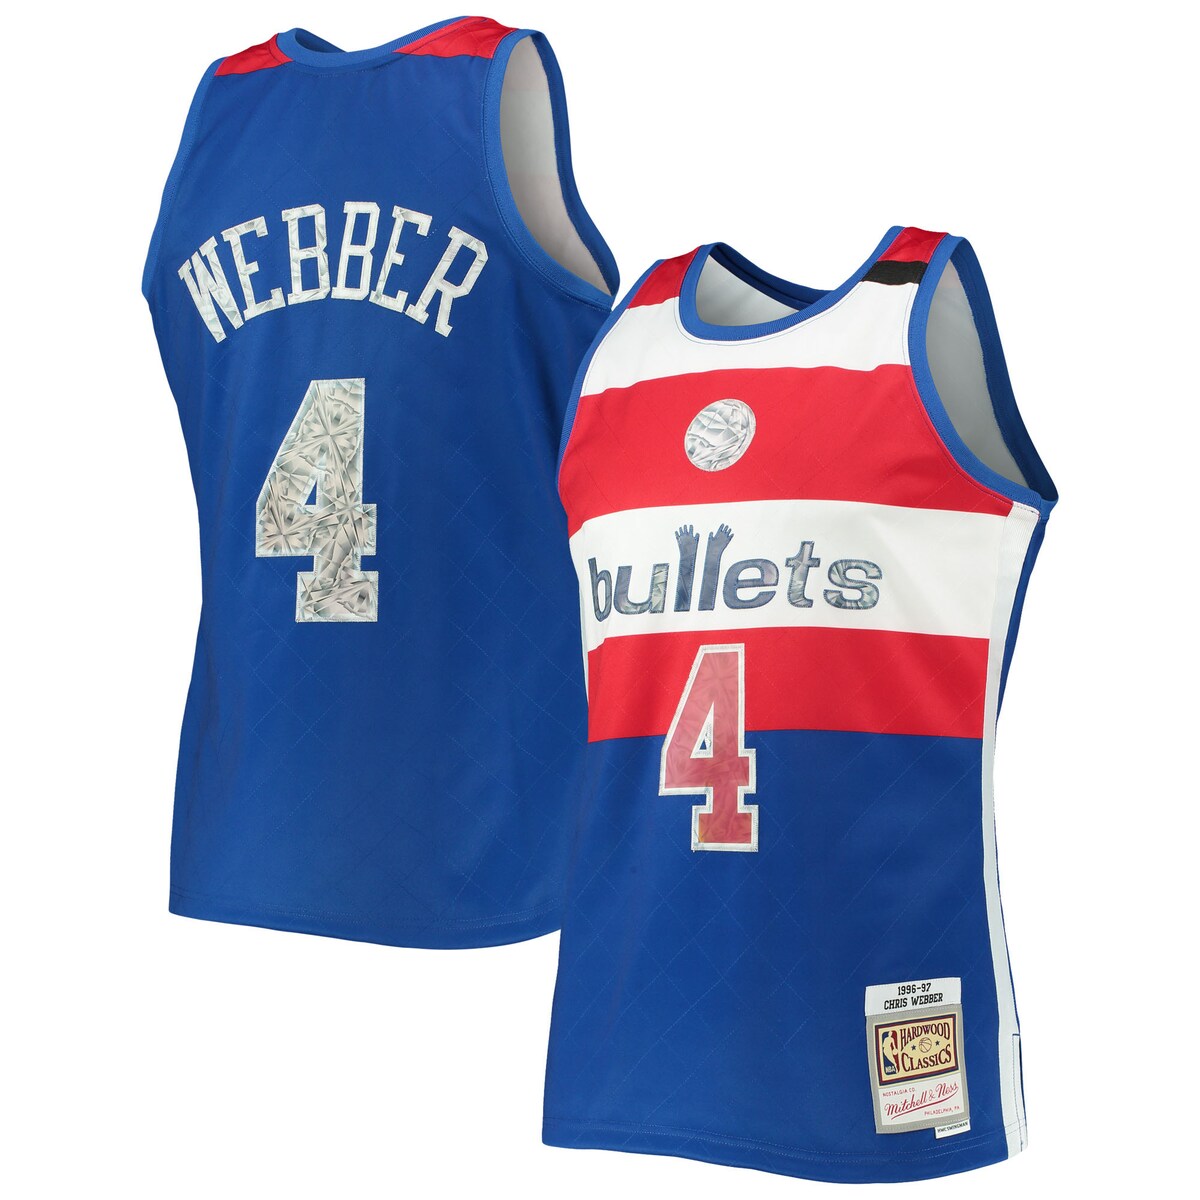 For the NBA's 75th anniversary, throw it back to one of the stars of the Washington Bullets with this Chris Webber Hardwood Classics Diamond Swingman jersey from Mitchell & Ness. It features faux diamond details for the league's big milestone and that old-school design Chris Webber used to wear back in the day. This authentic piece of gear is a great way to mesh past and present as you get fired up for game day.Machine wash, line dryStraight hemline with side splitsSwingman ThrowbackOfficially licensedStitched holographic applique with faux diamond patternSleevelessCrew neckMaterial: 100% PolyesterImportedStitched designWoven jock tag at hemBrand: Mitchell & Ness